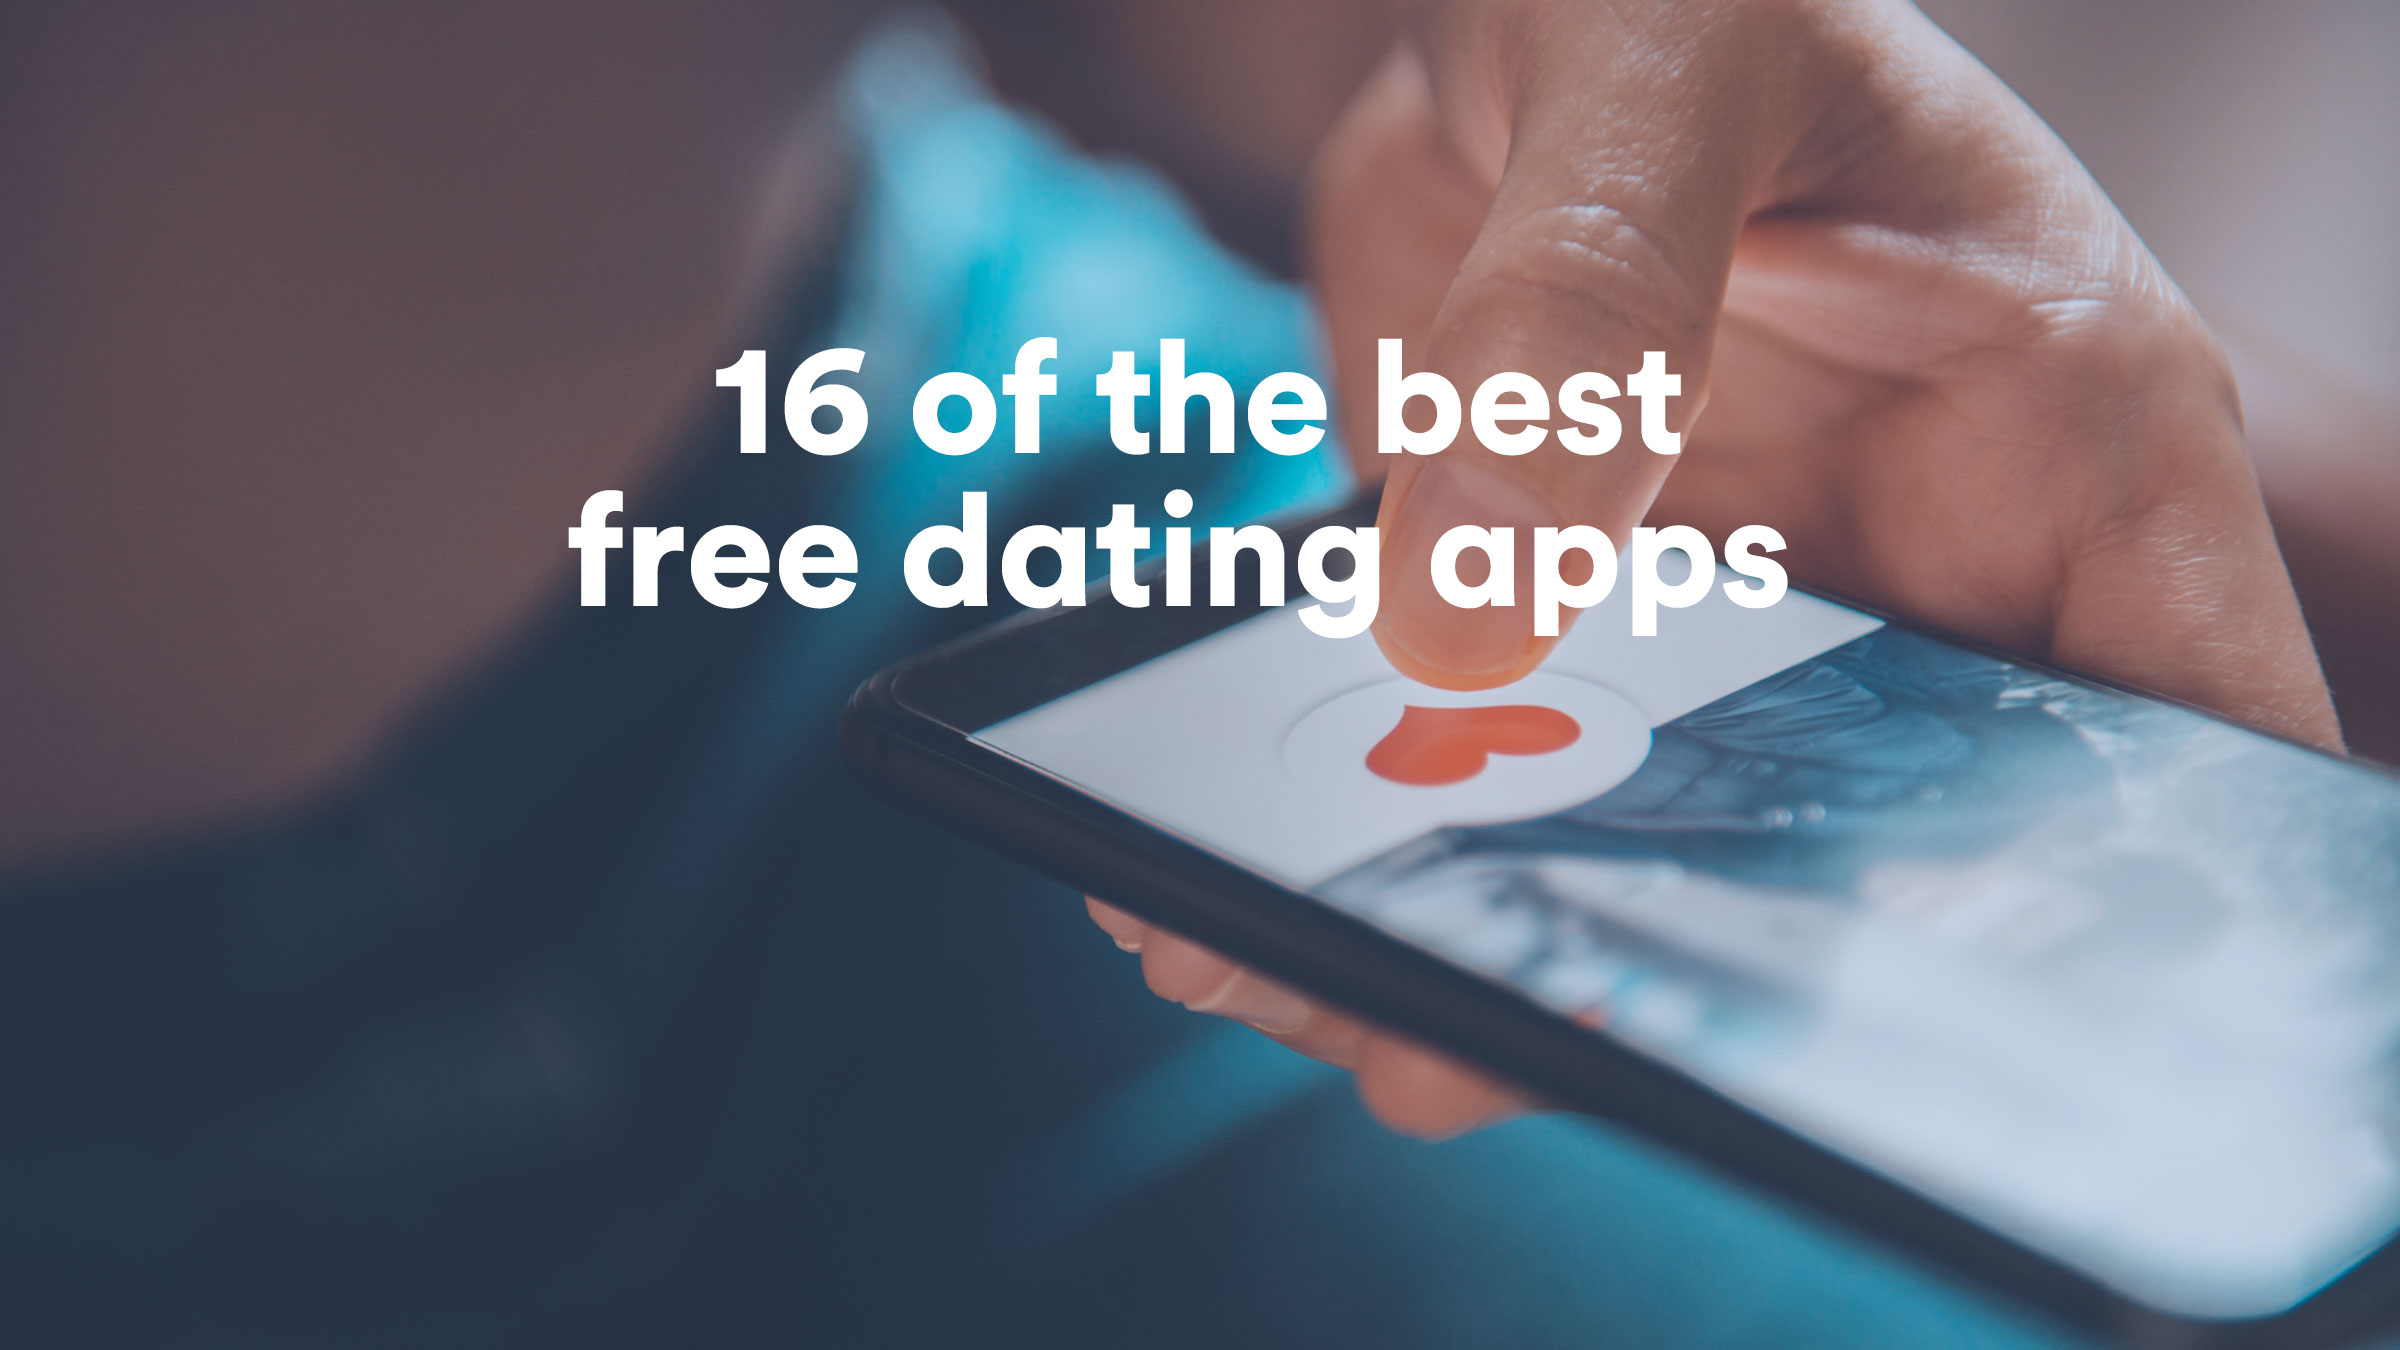 dating apps and rape 2019 in usa data